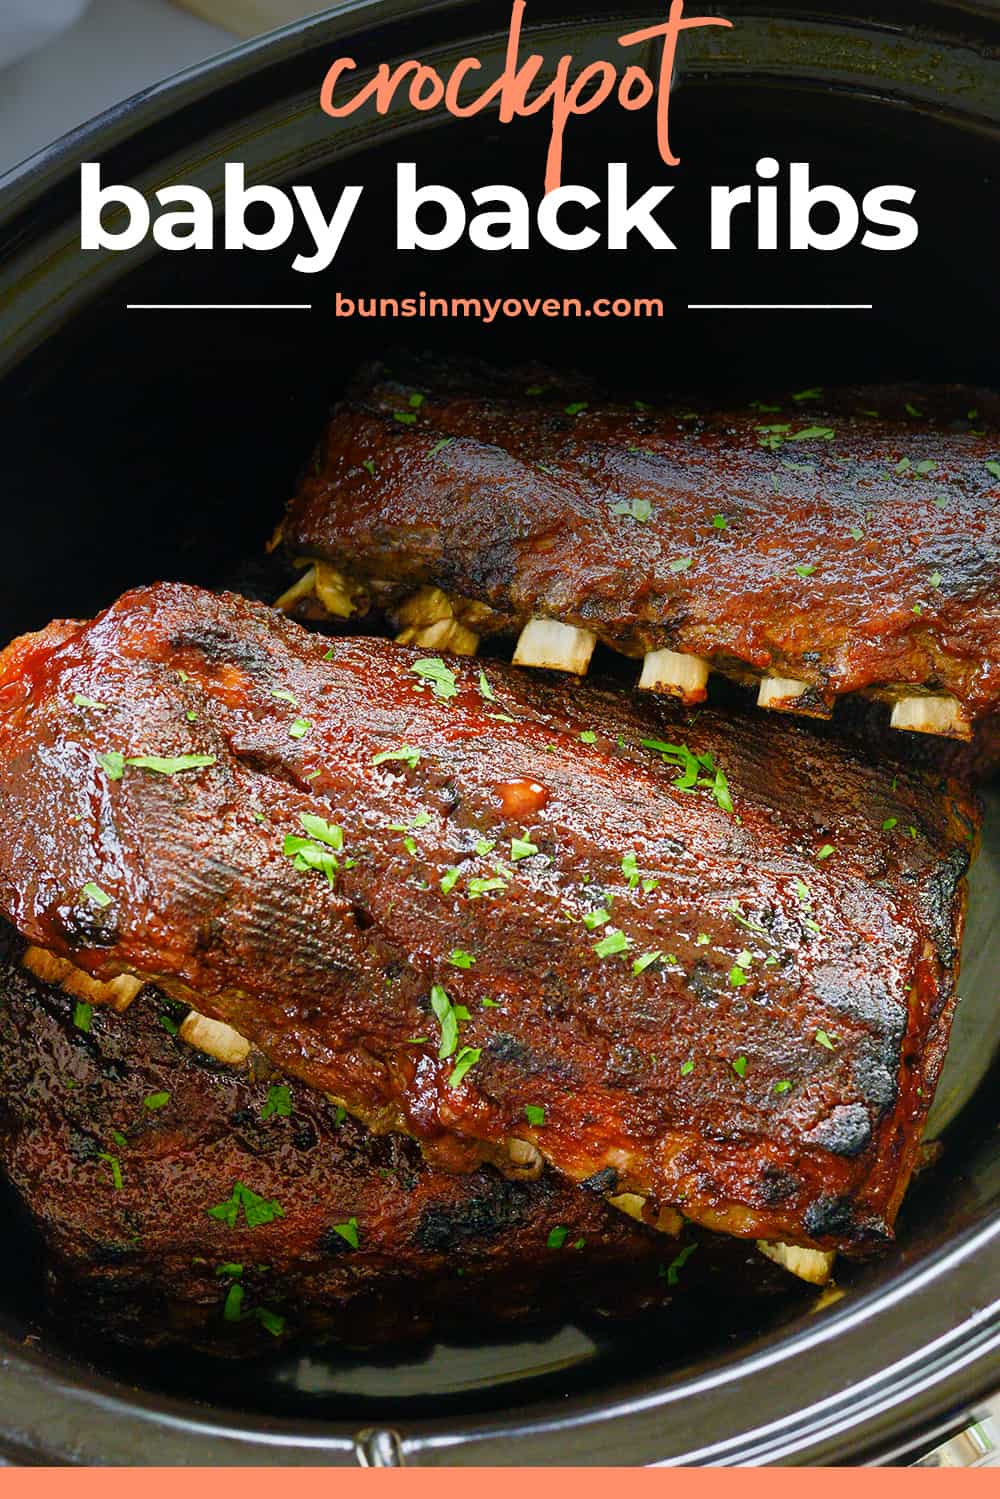 corckpot baby back ribs in slow cooker.